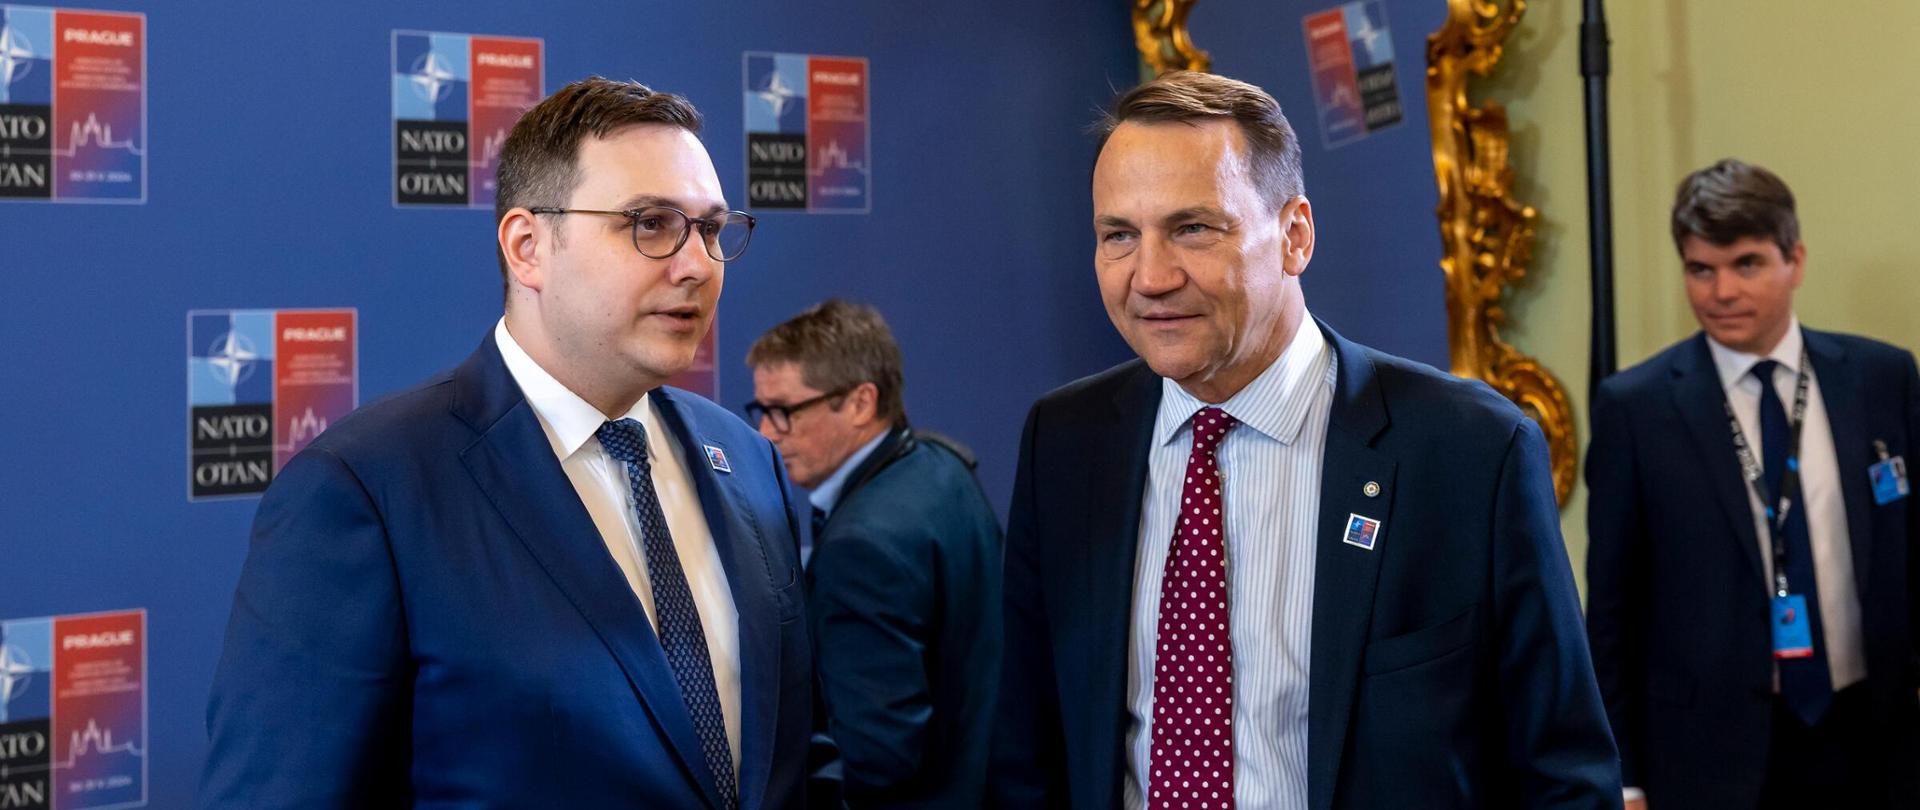 Minister Radosław Sikorski on NATO foreign ministers meeting in Prague